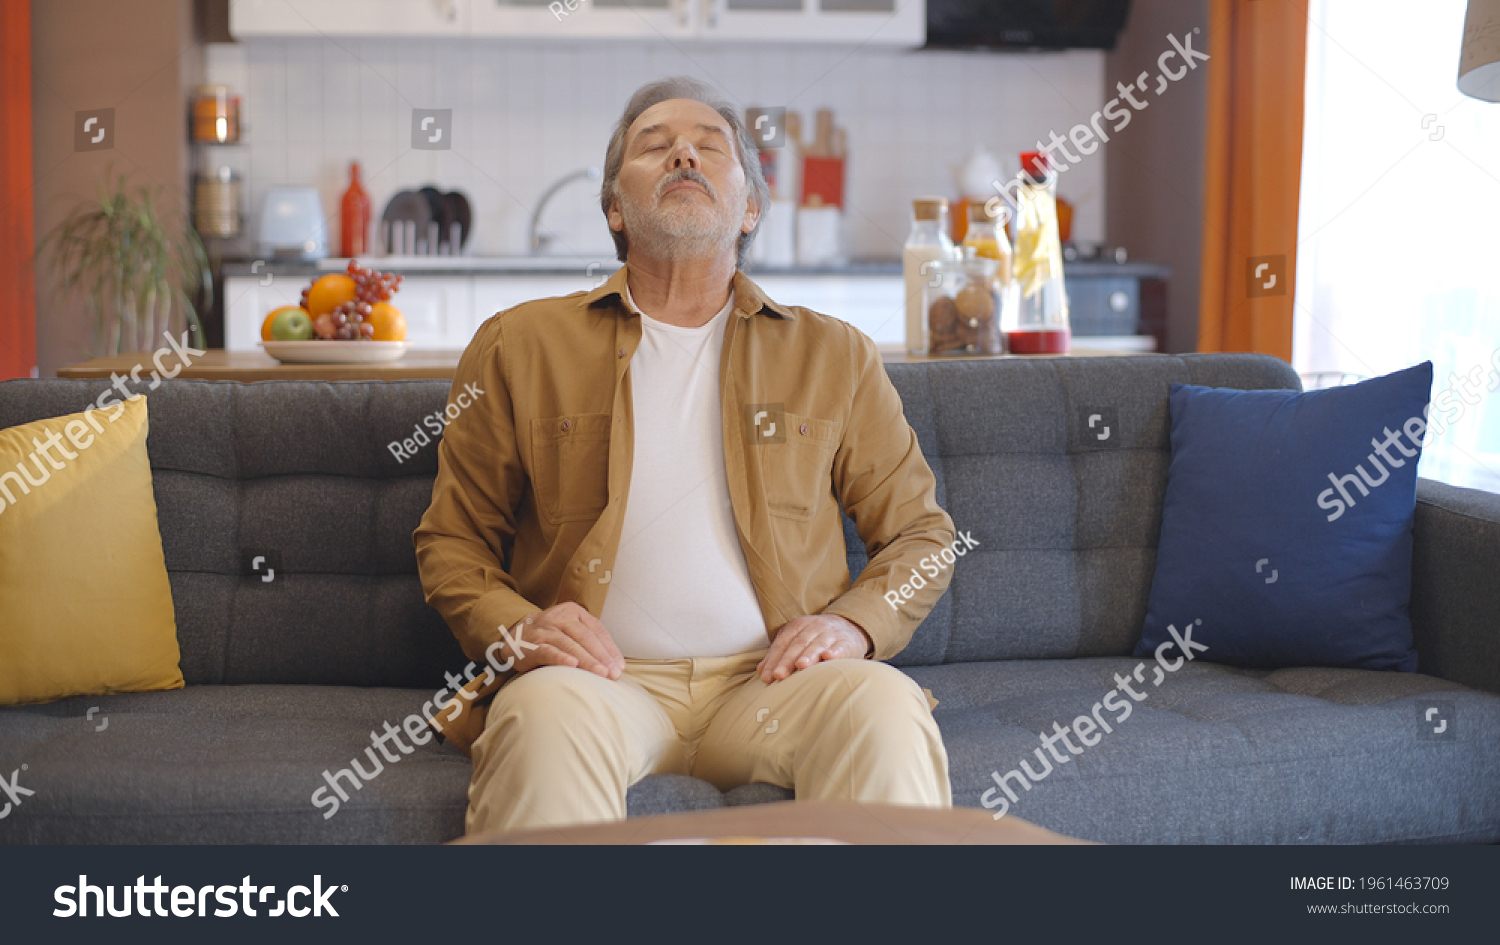 Breathing deeply at home, the old man breathes peacefully and yawns. Breath at home concept. Breath and peace concept.Peaceful home concept.  #1961463709